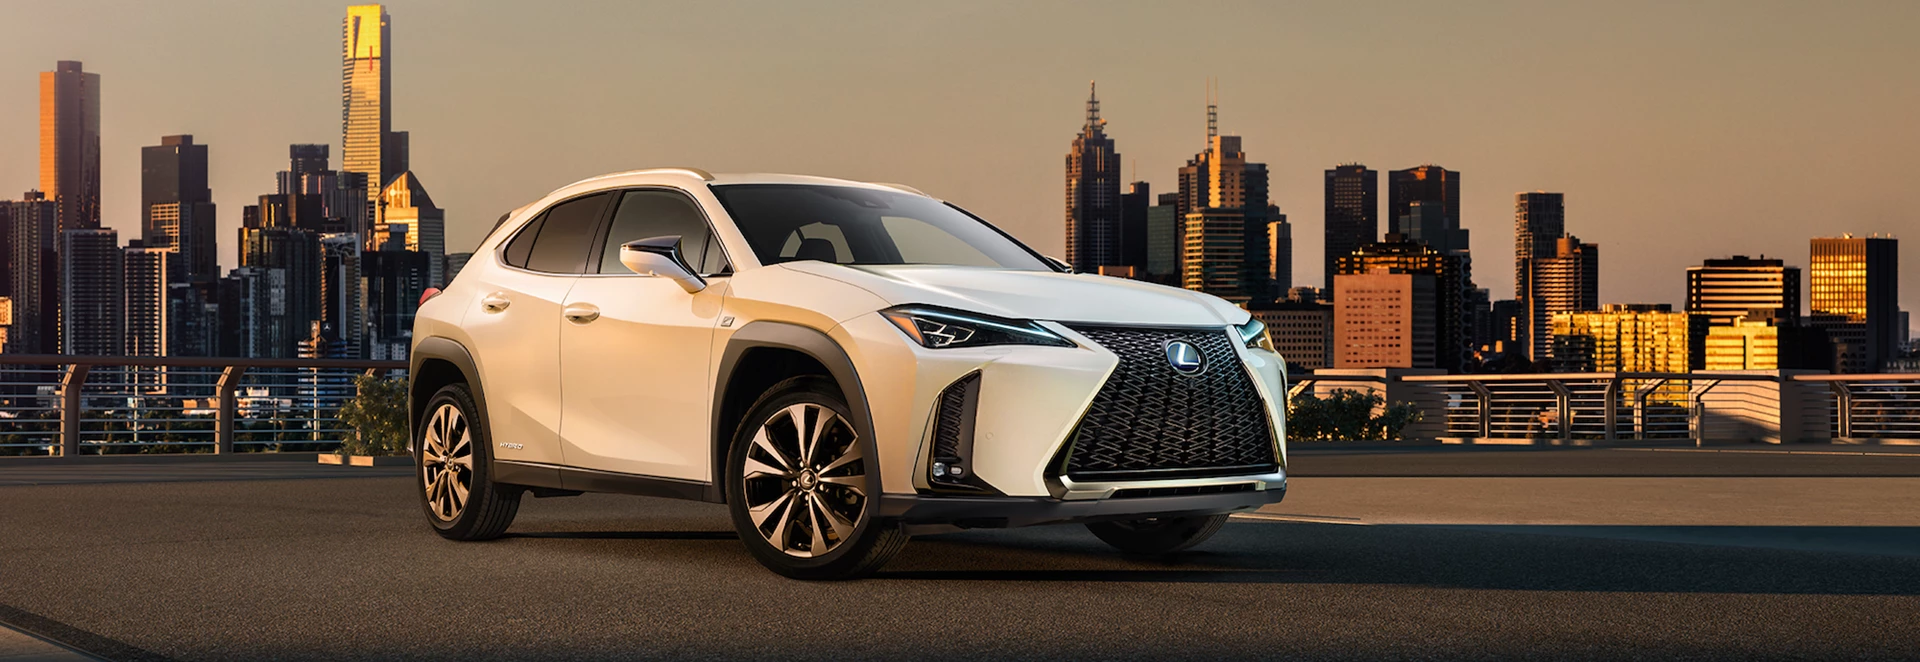 New 2018 Lexus UX compact SUV revealed